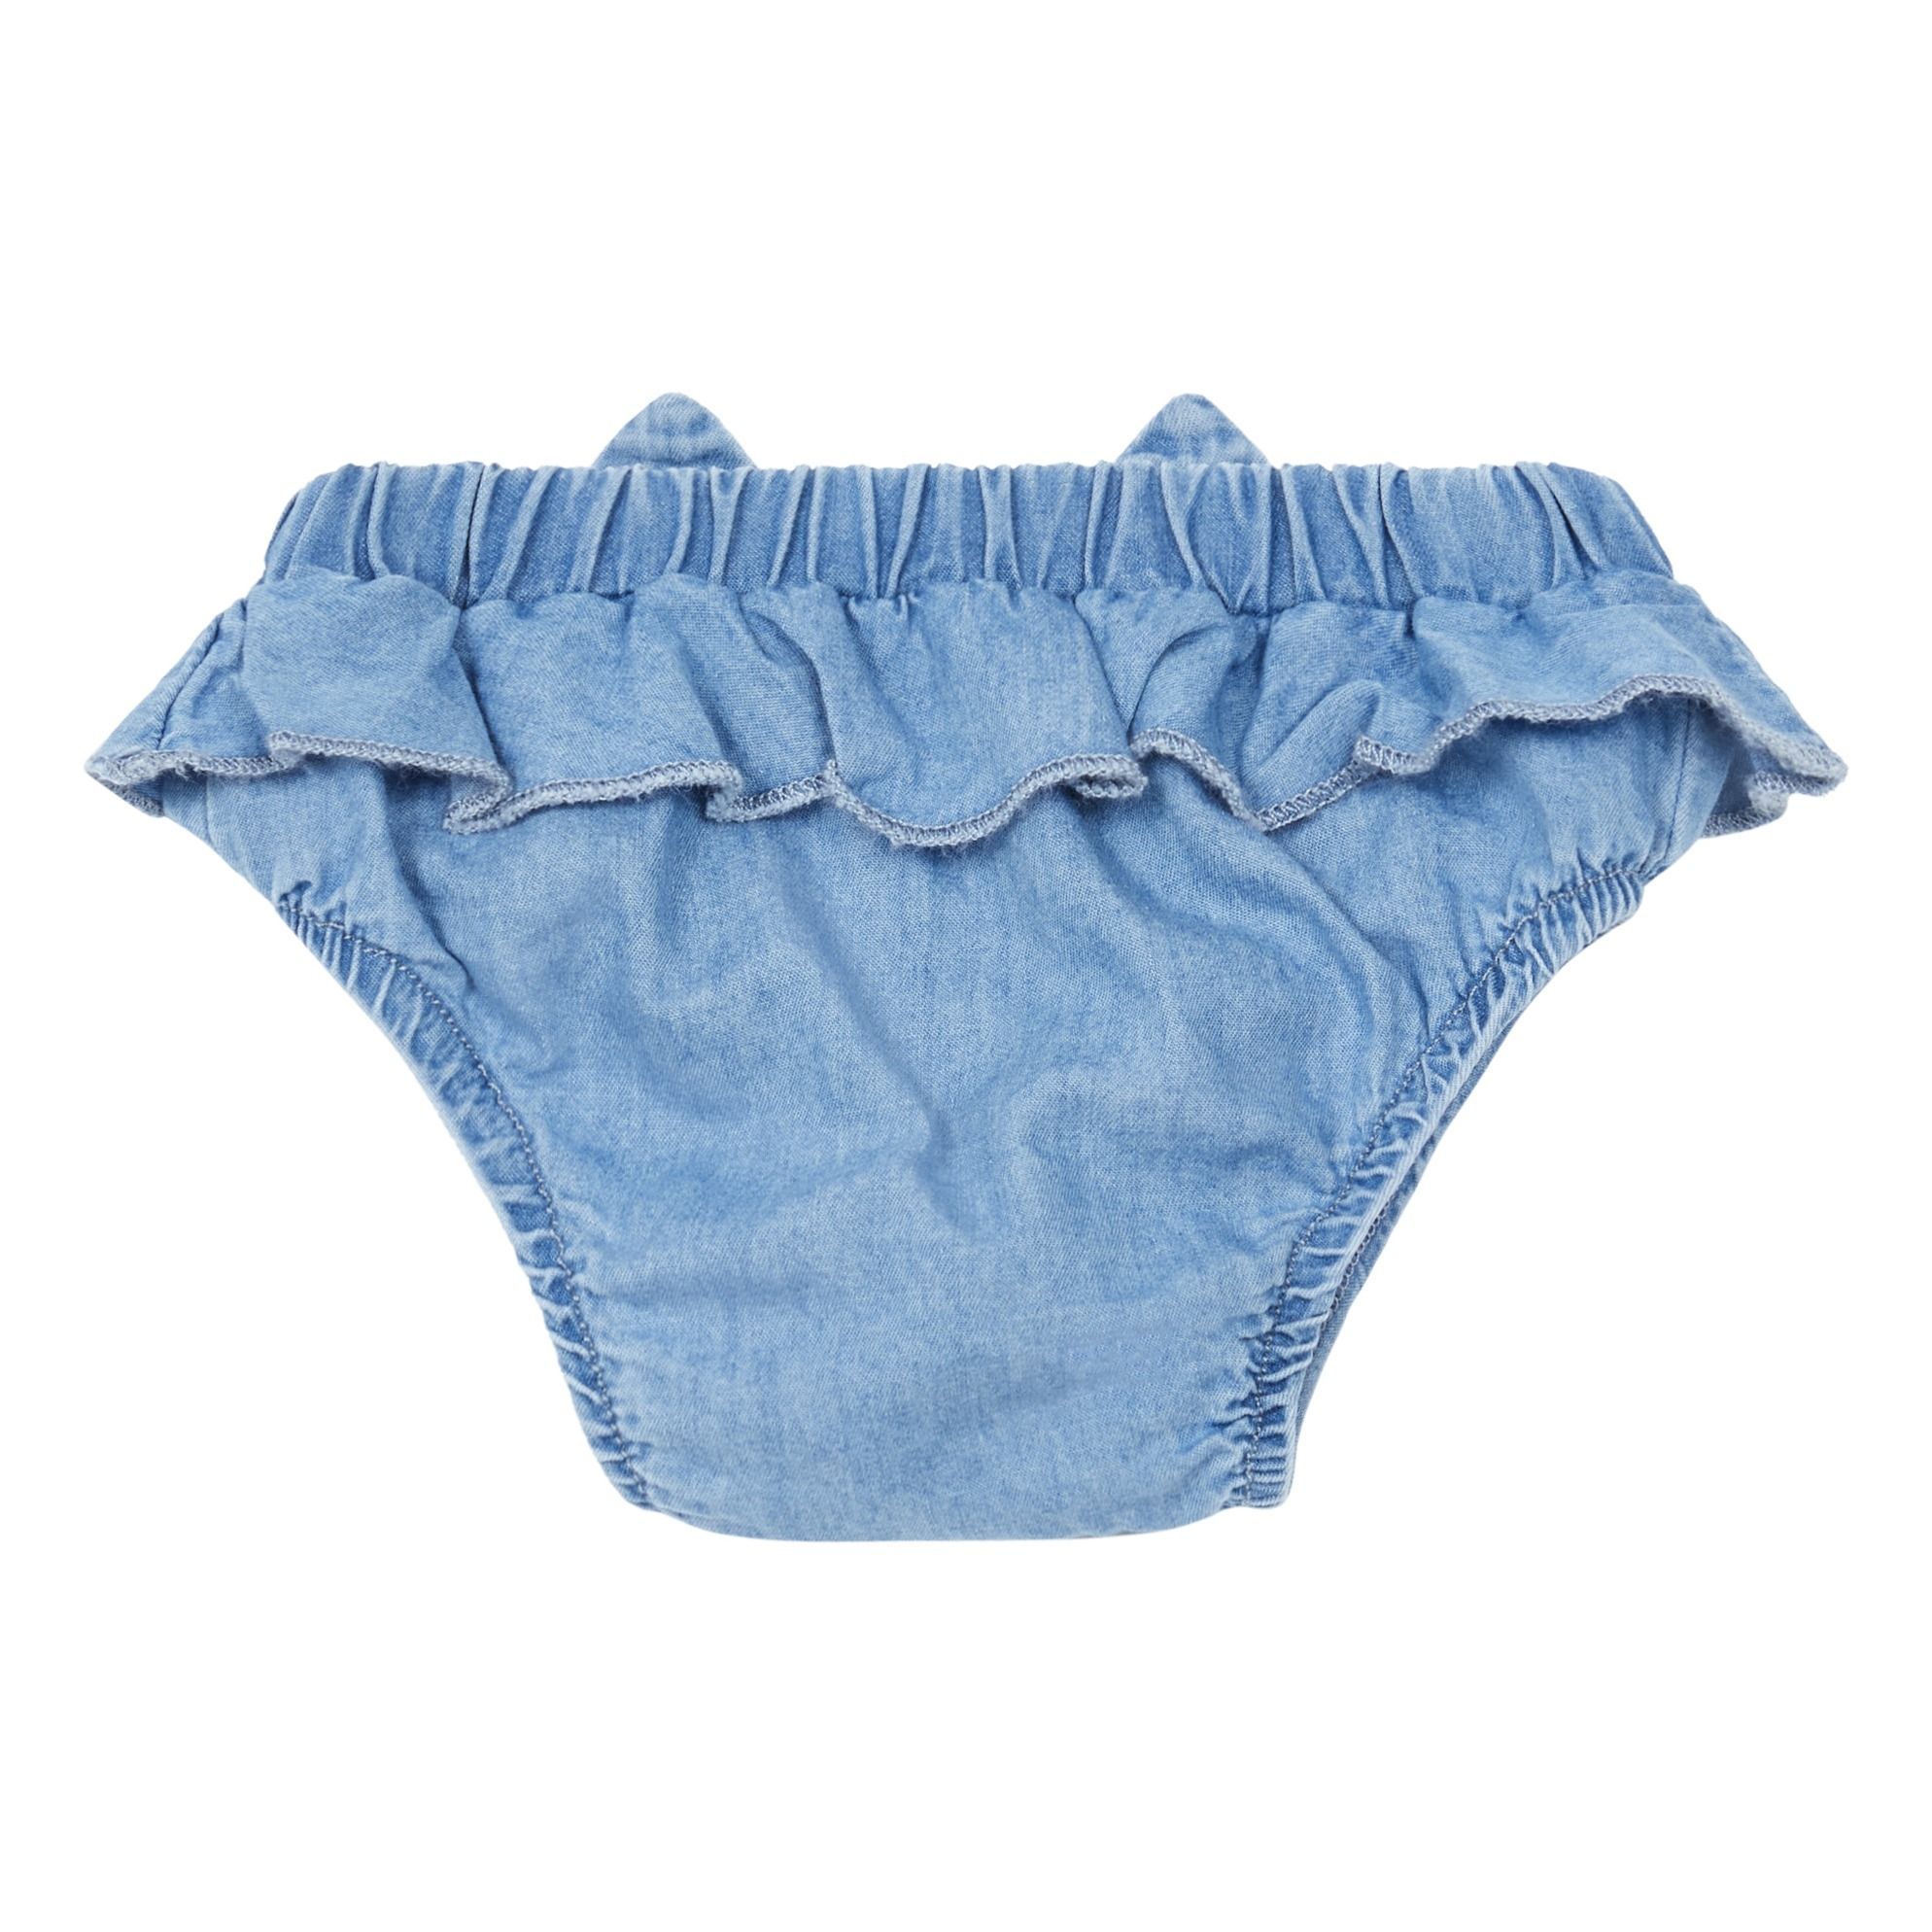 Exclusive: Emile et Ida x Smallable - Embroidered chambray knickers ...